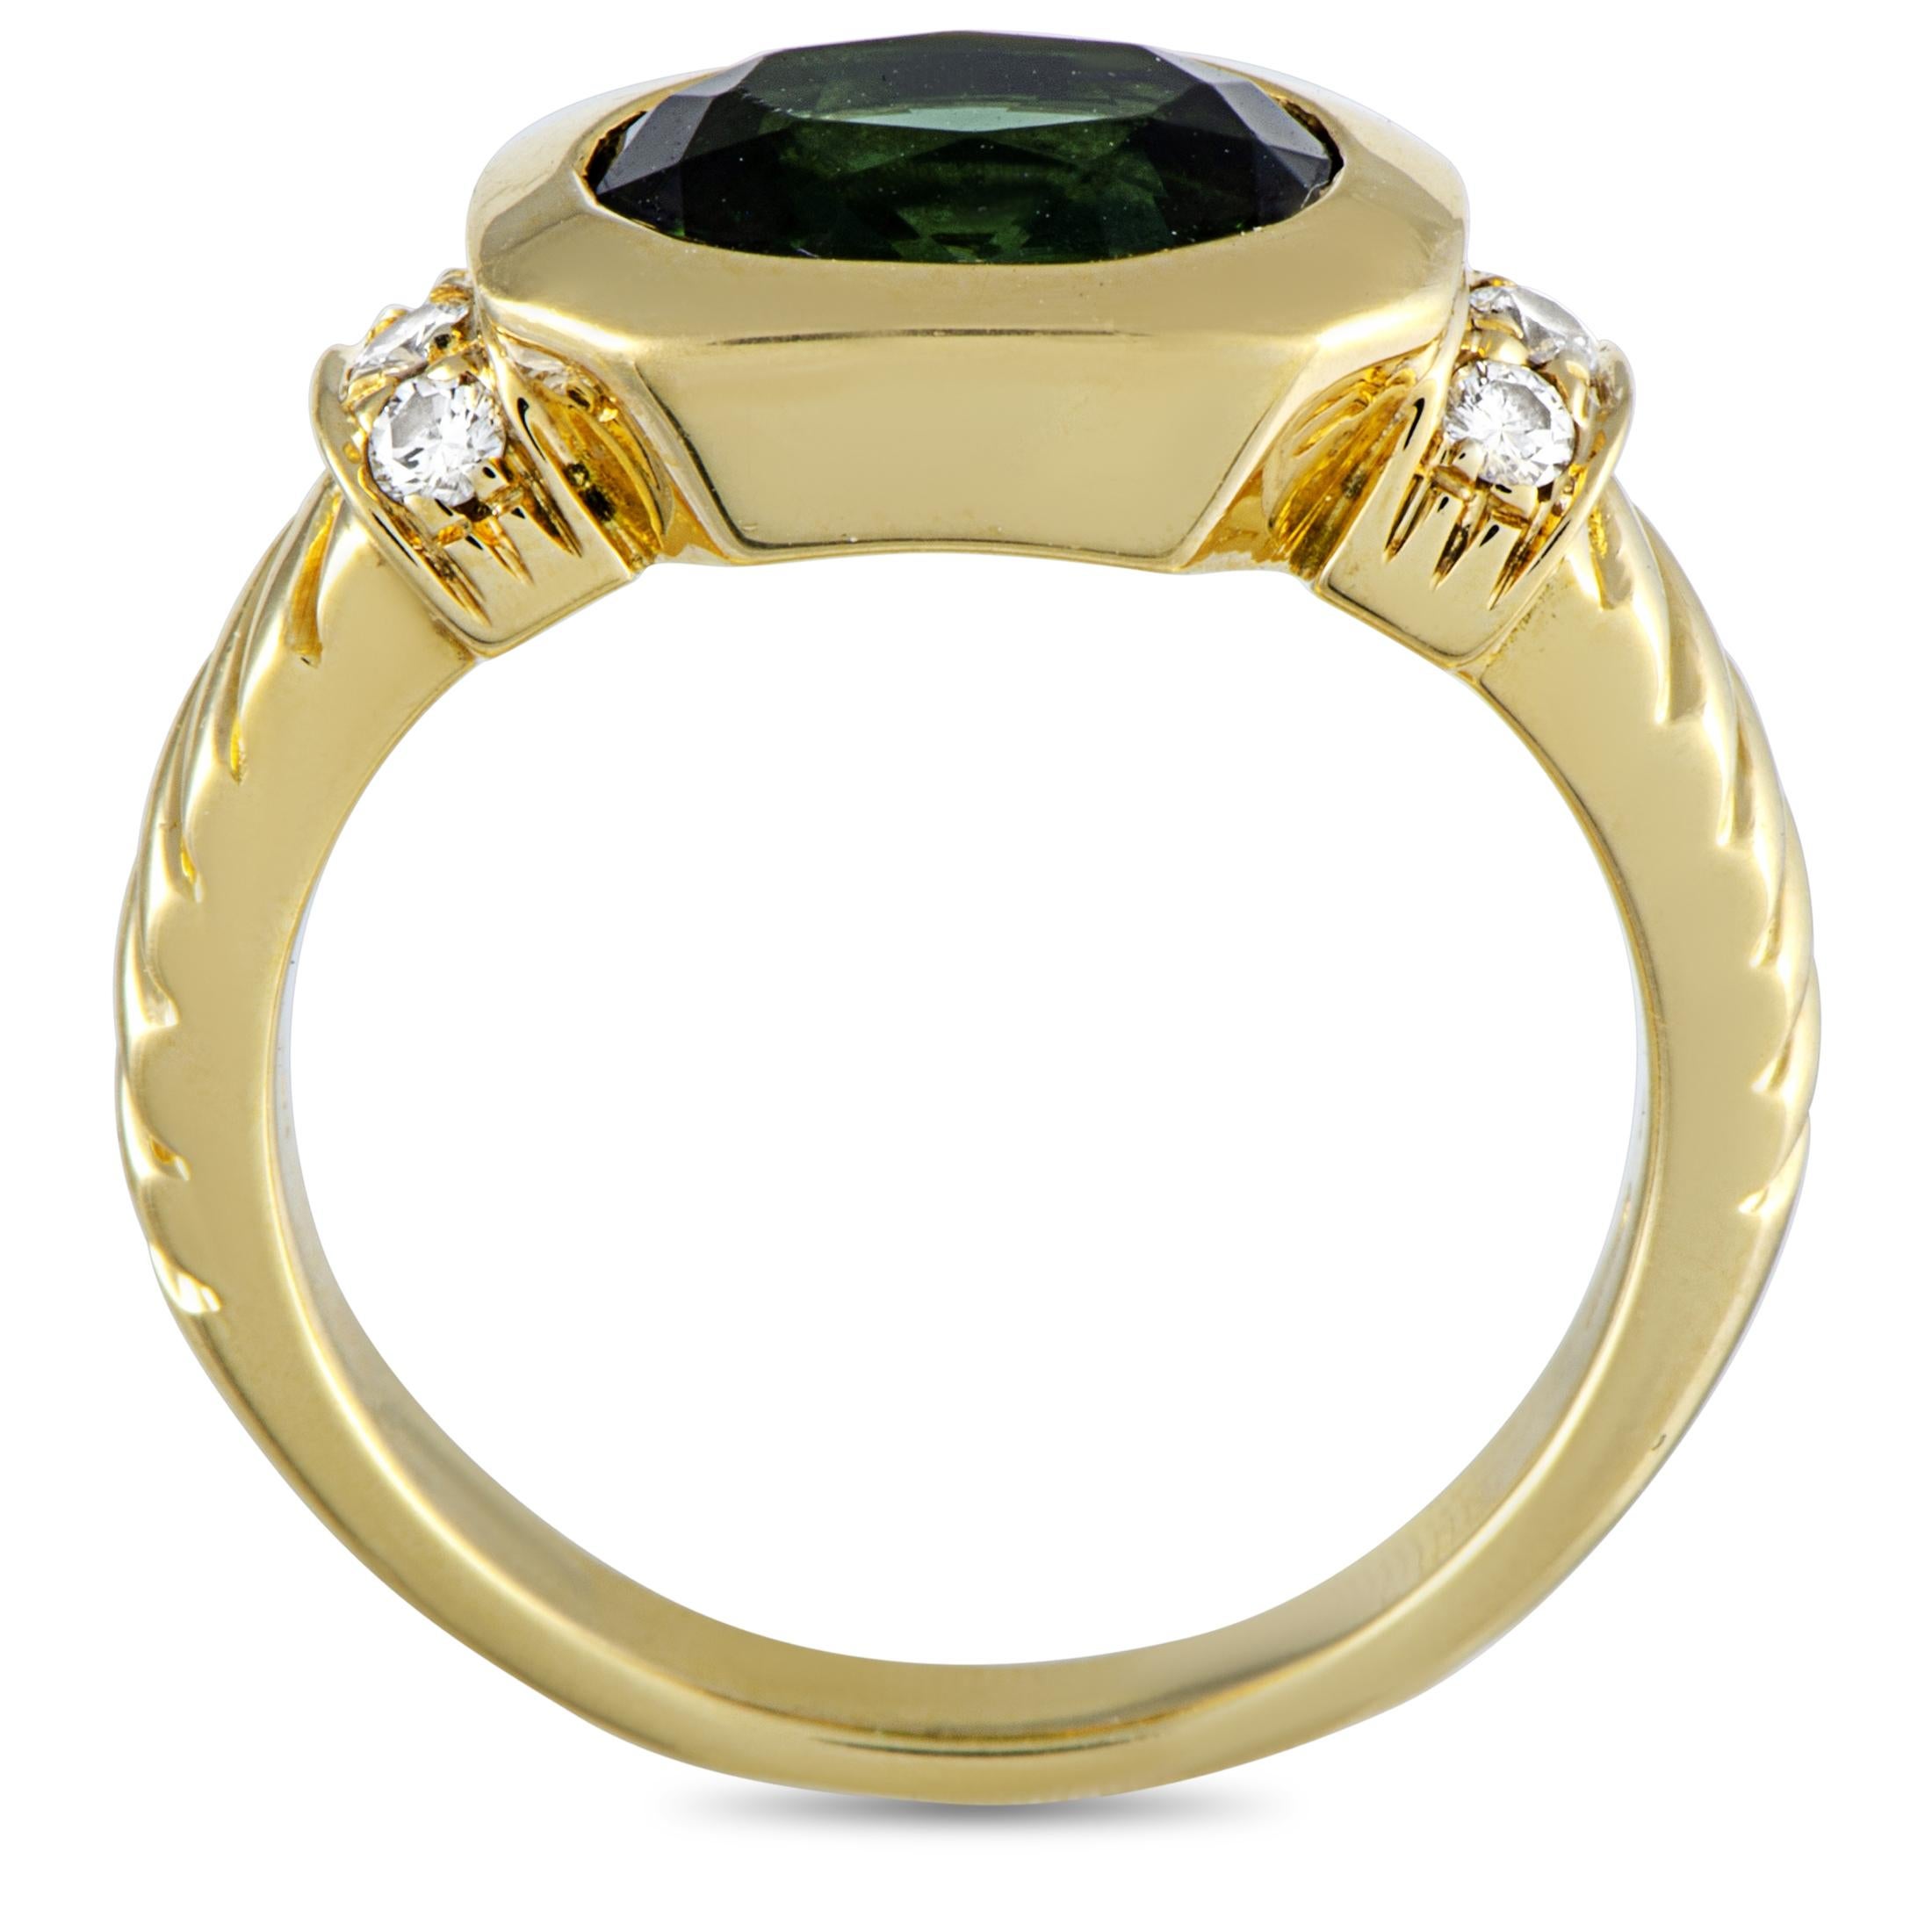 This Bvlgari ring is crafted from 18K yellow gold and set with diamonds and a tourmaline. The ring weighs 6.4 grams, boasting band thickness of 4 mm and top height of 6 mm, while top dimensions measure 15 by 9 mm.
 
 Offered in estate condition,